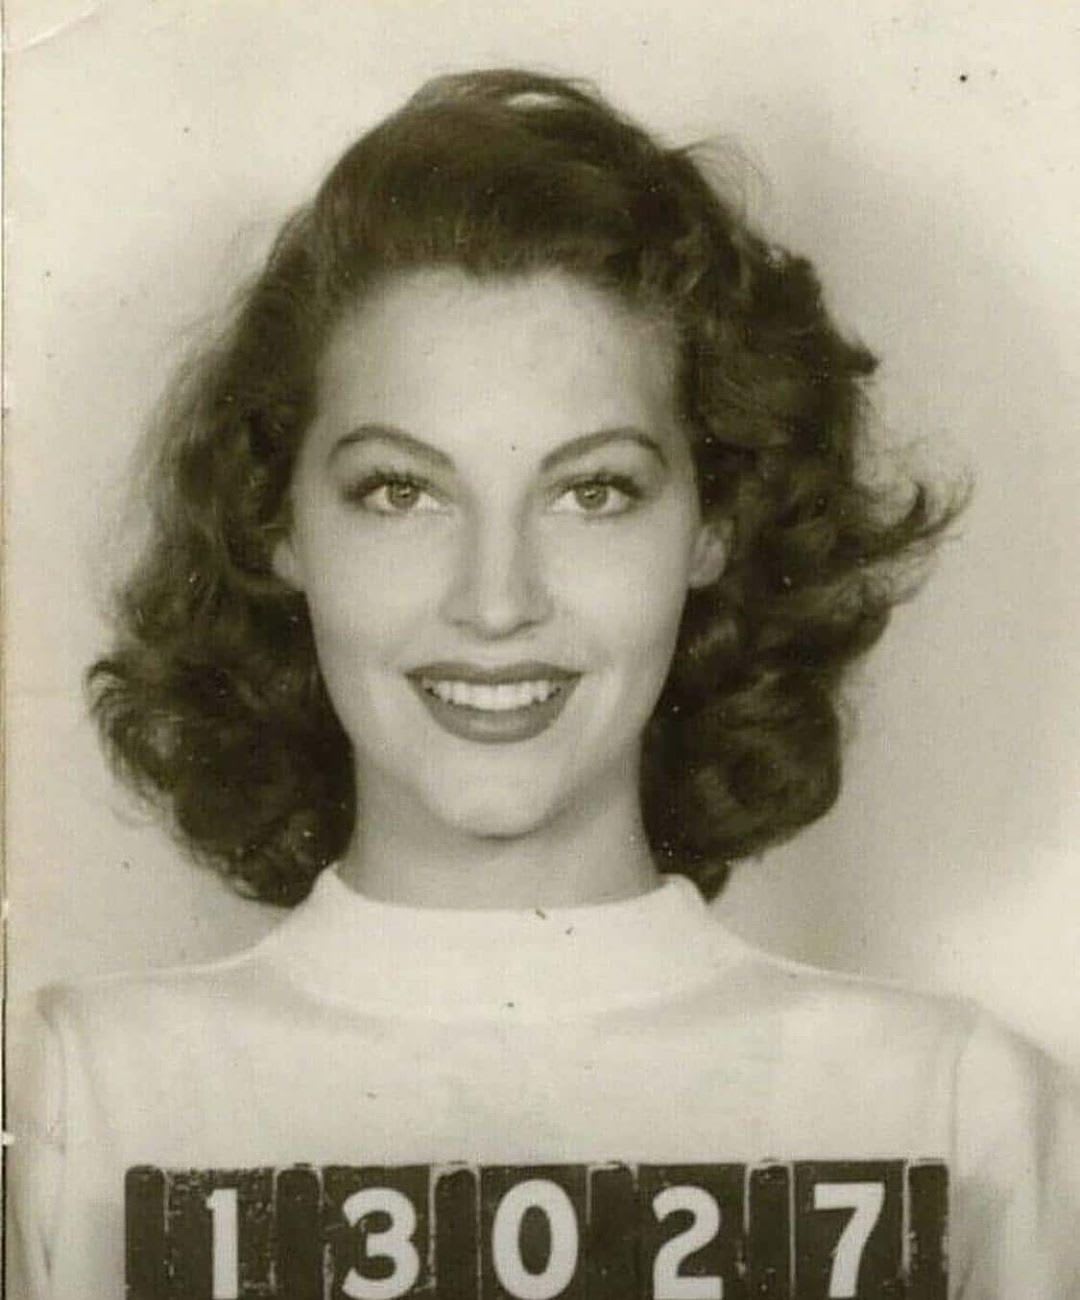 Ava Gardner during MGM employment questionnaire - 1942